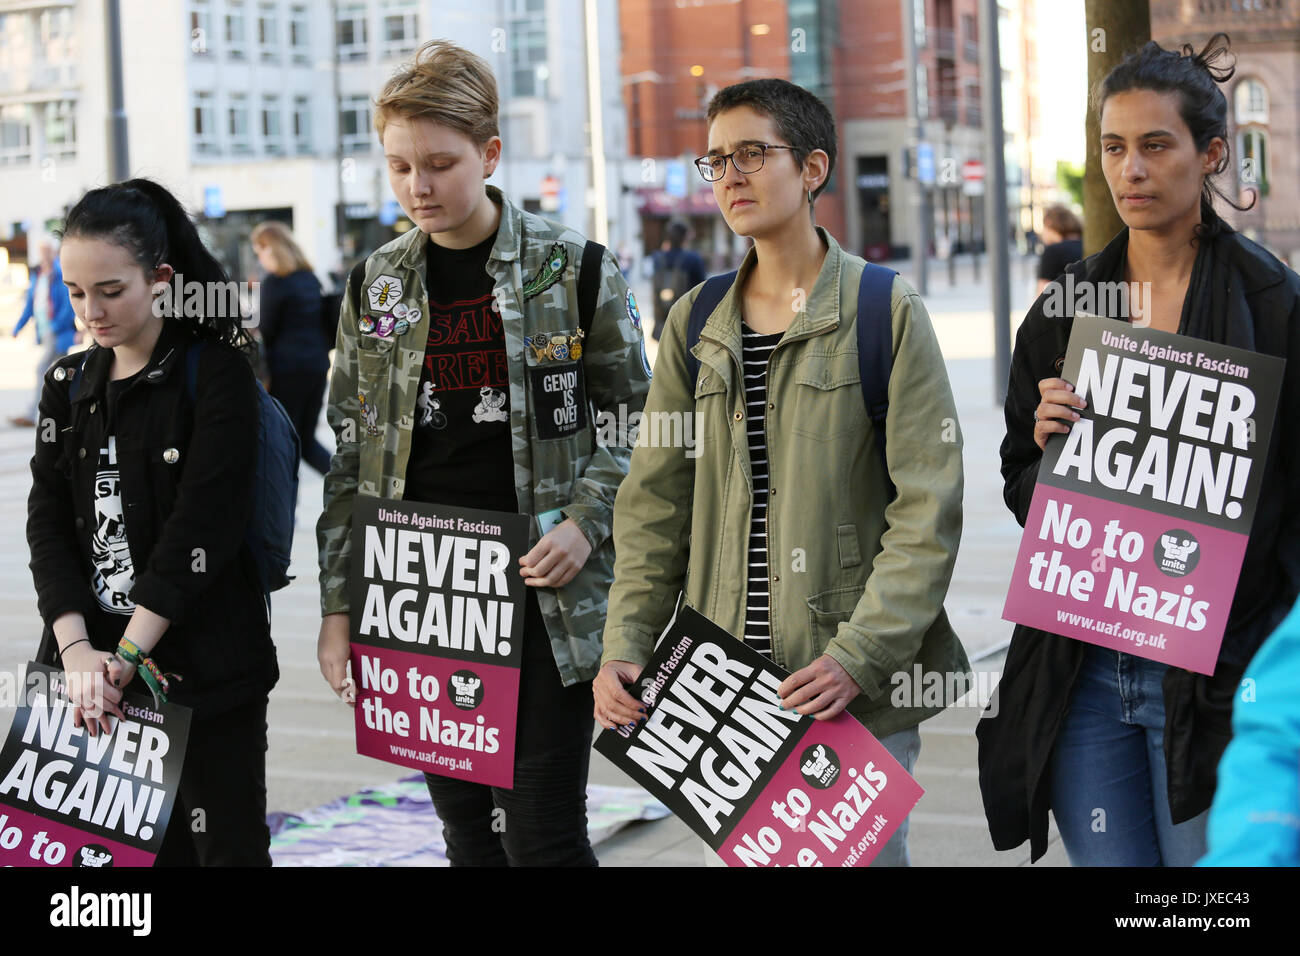 Manchester, UK. 15th Aug, 2017. 'Never Again no to the Nazis' placards held at vigil for Heather Heyer who was killed in Charlottesville after a car crashed into demonstrators protesting a white supremacy rally, St Peters Square, Manchester, 15th August, 2017 Credit: Barbara Cook/Alamy Live News Stock Photo